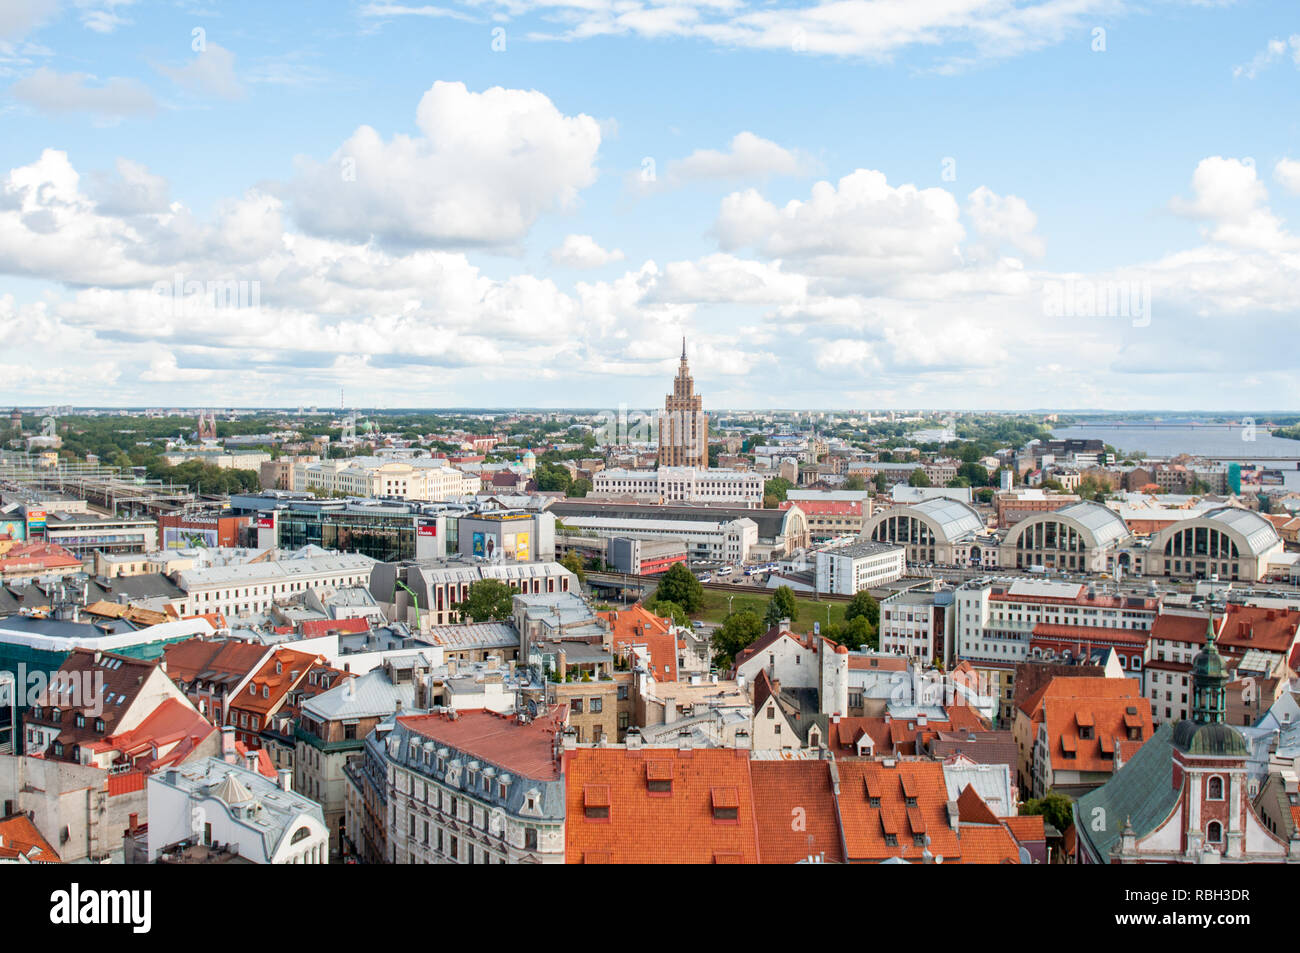 Riga is the capital and largest city of Latvia. Stock Photo